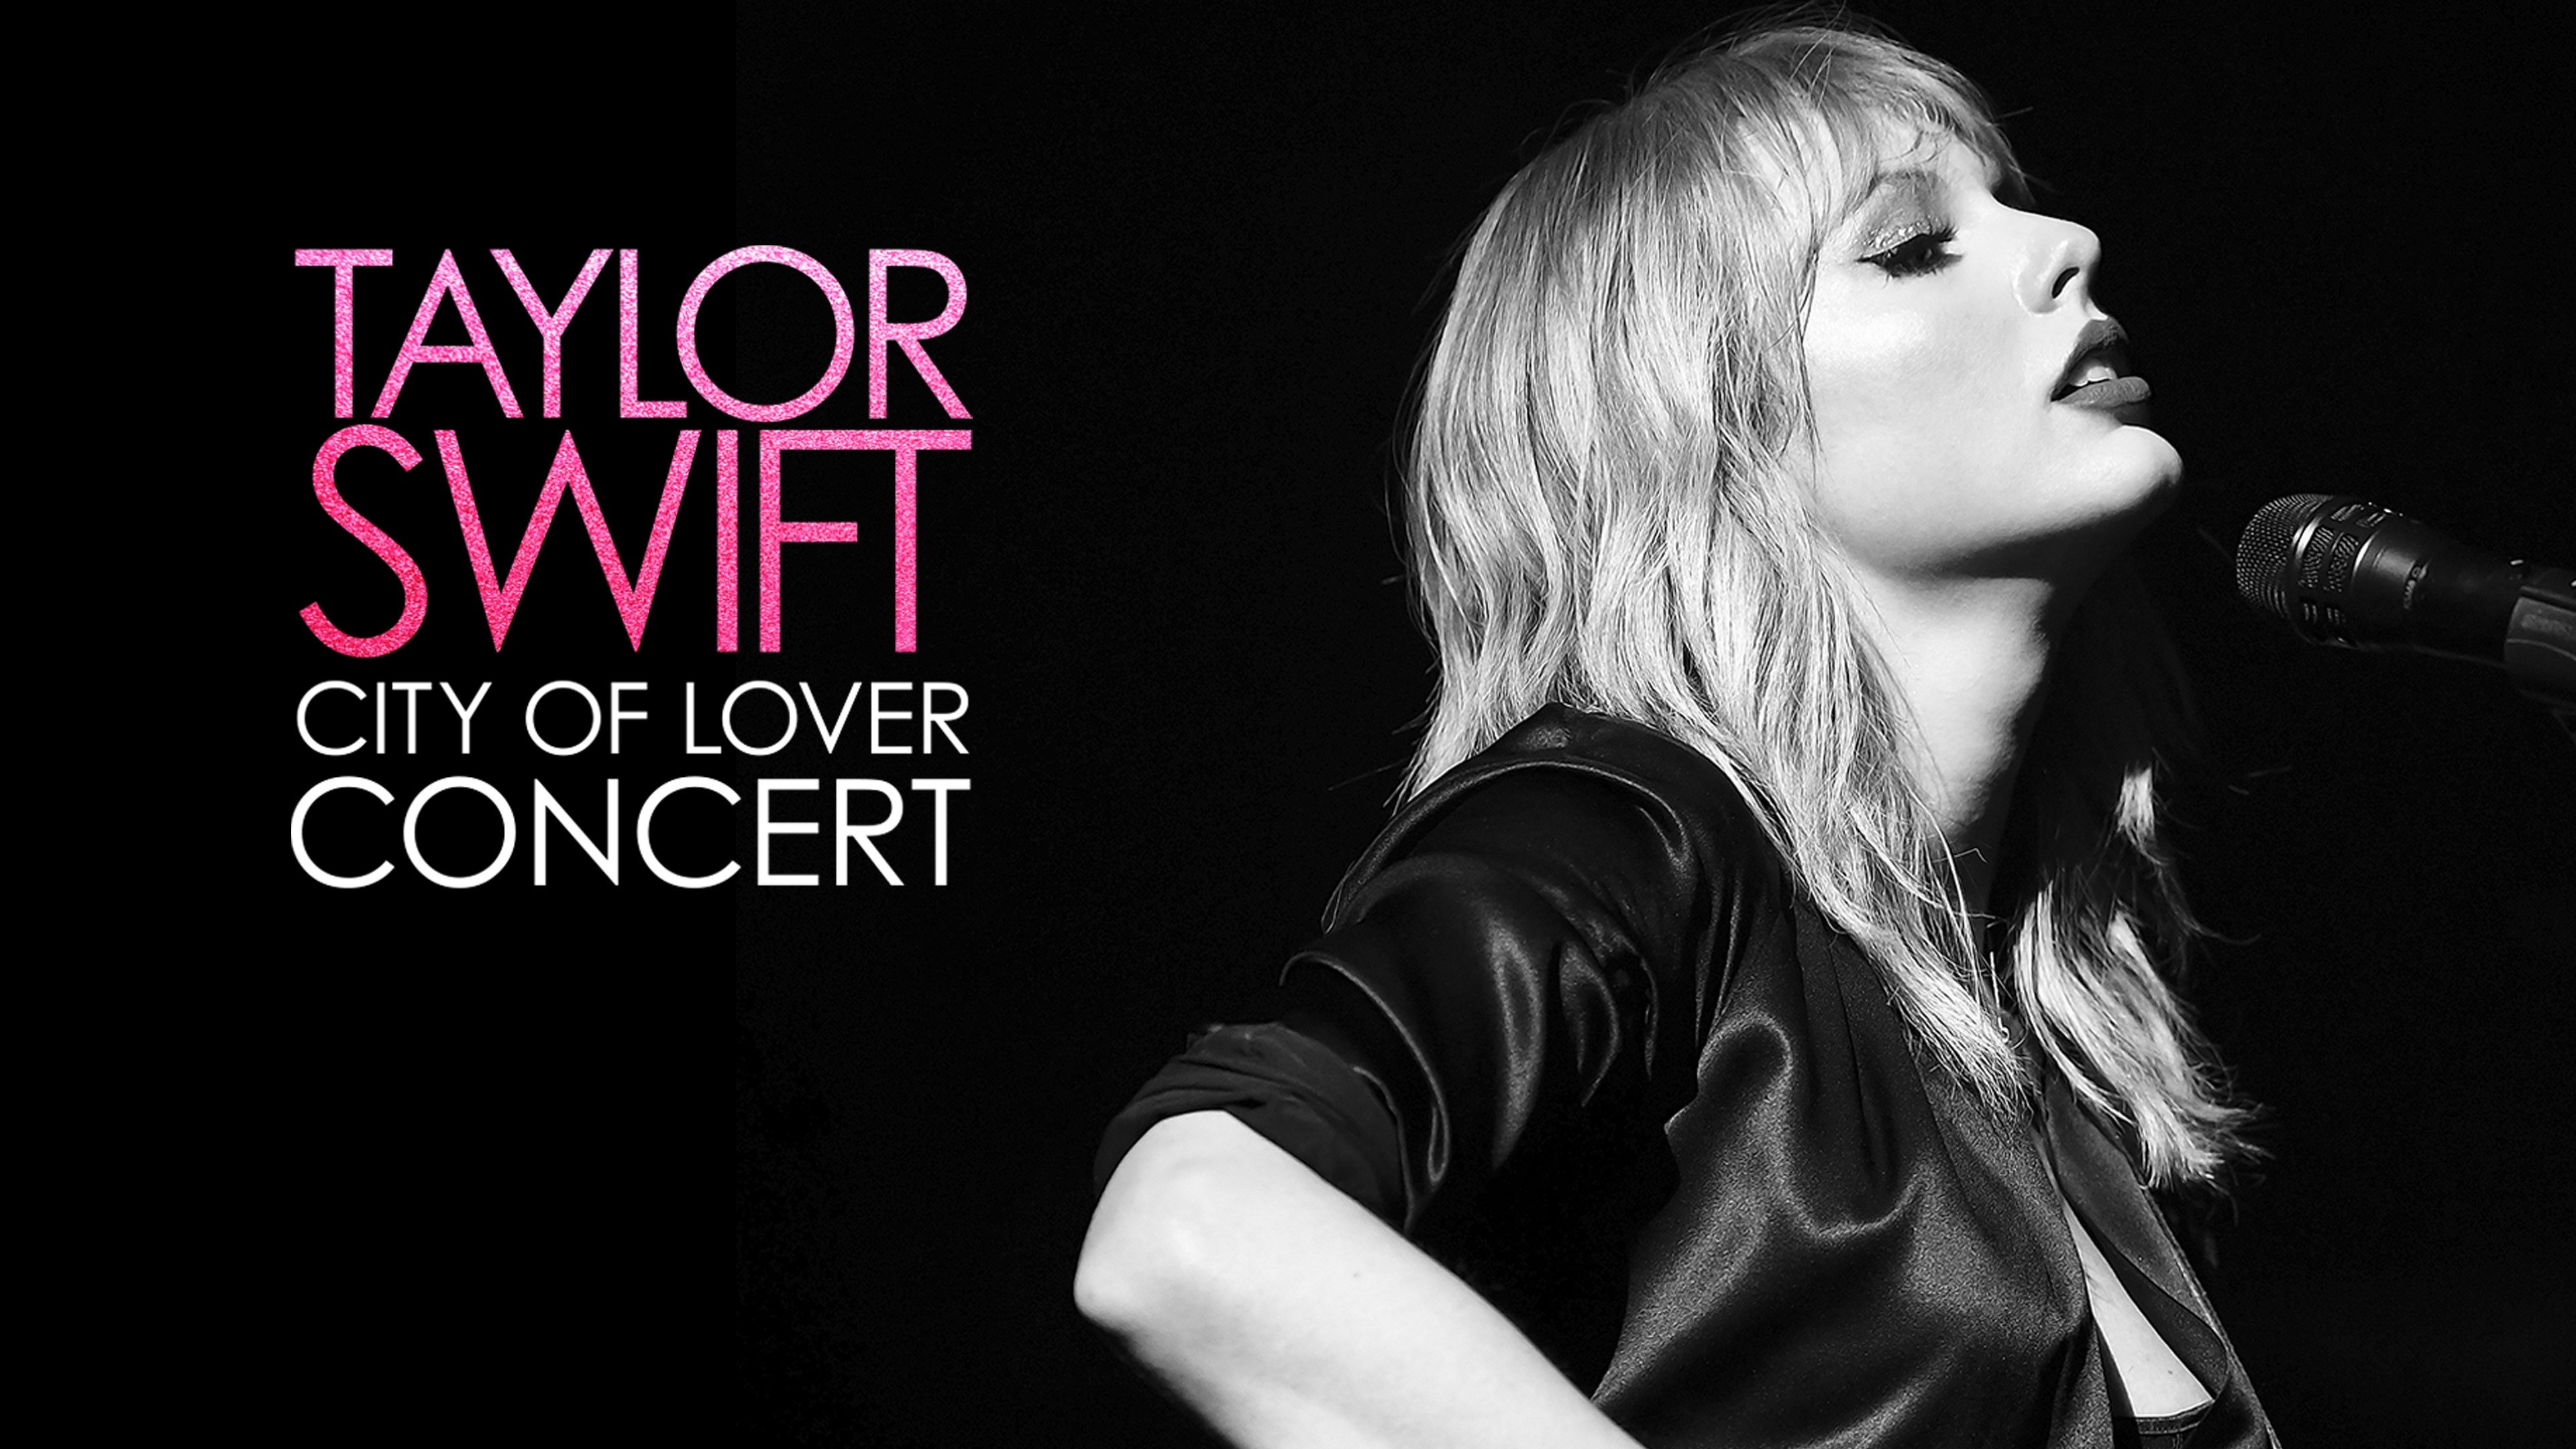 Taylor Swift City of Lover Concert - ABC Special